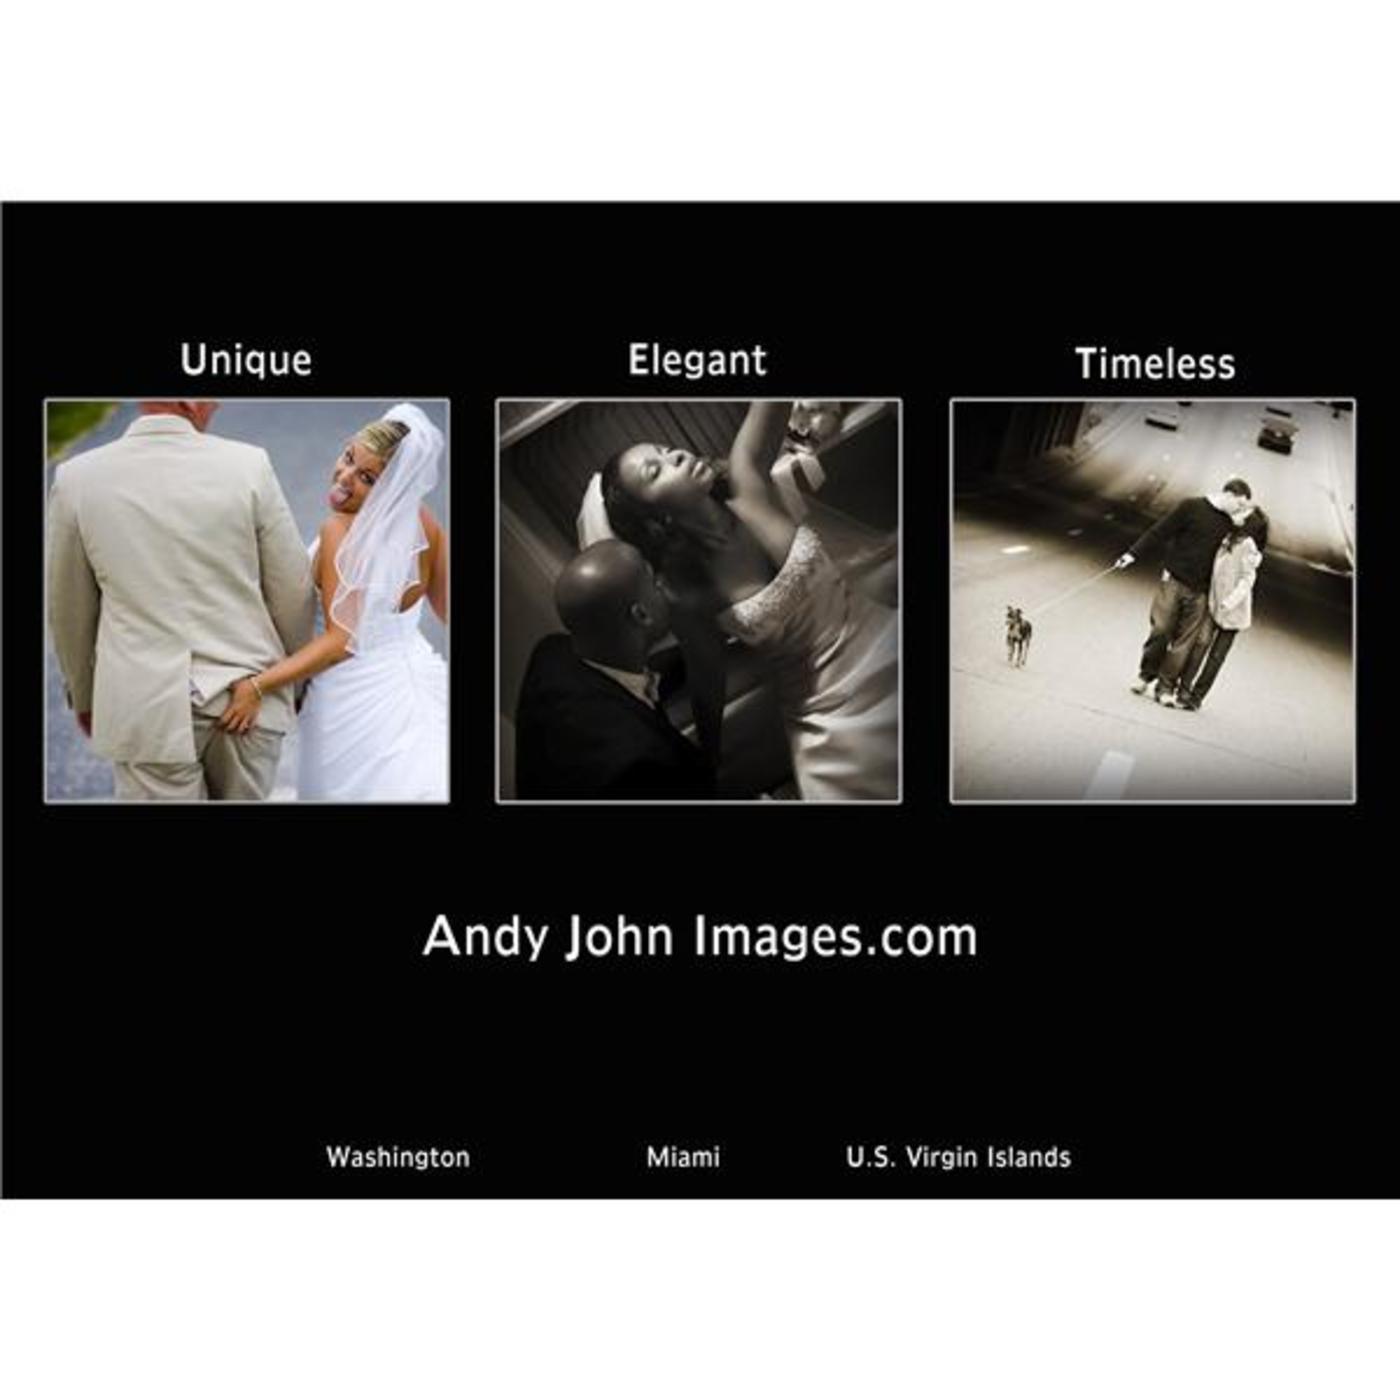 Andy John Images